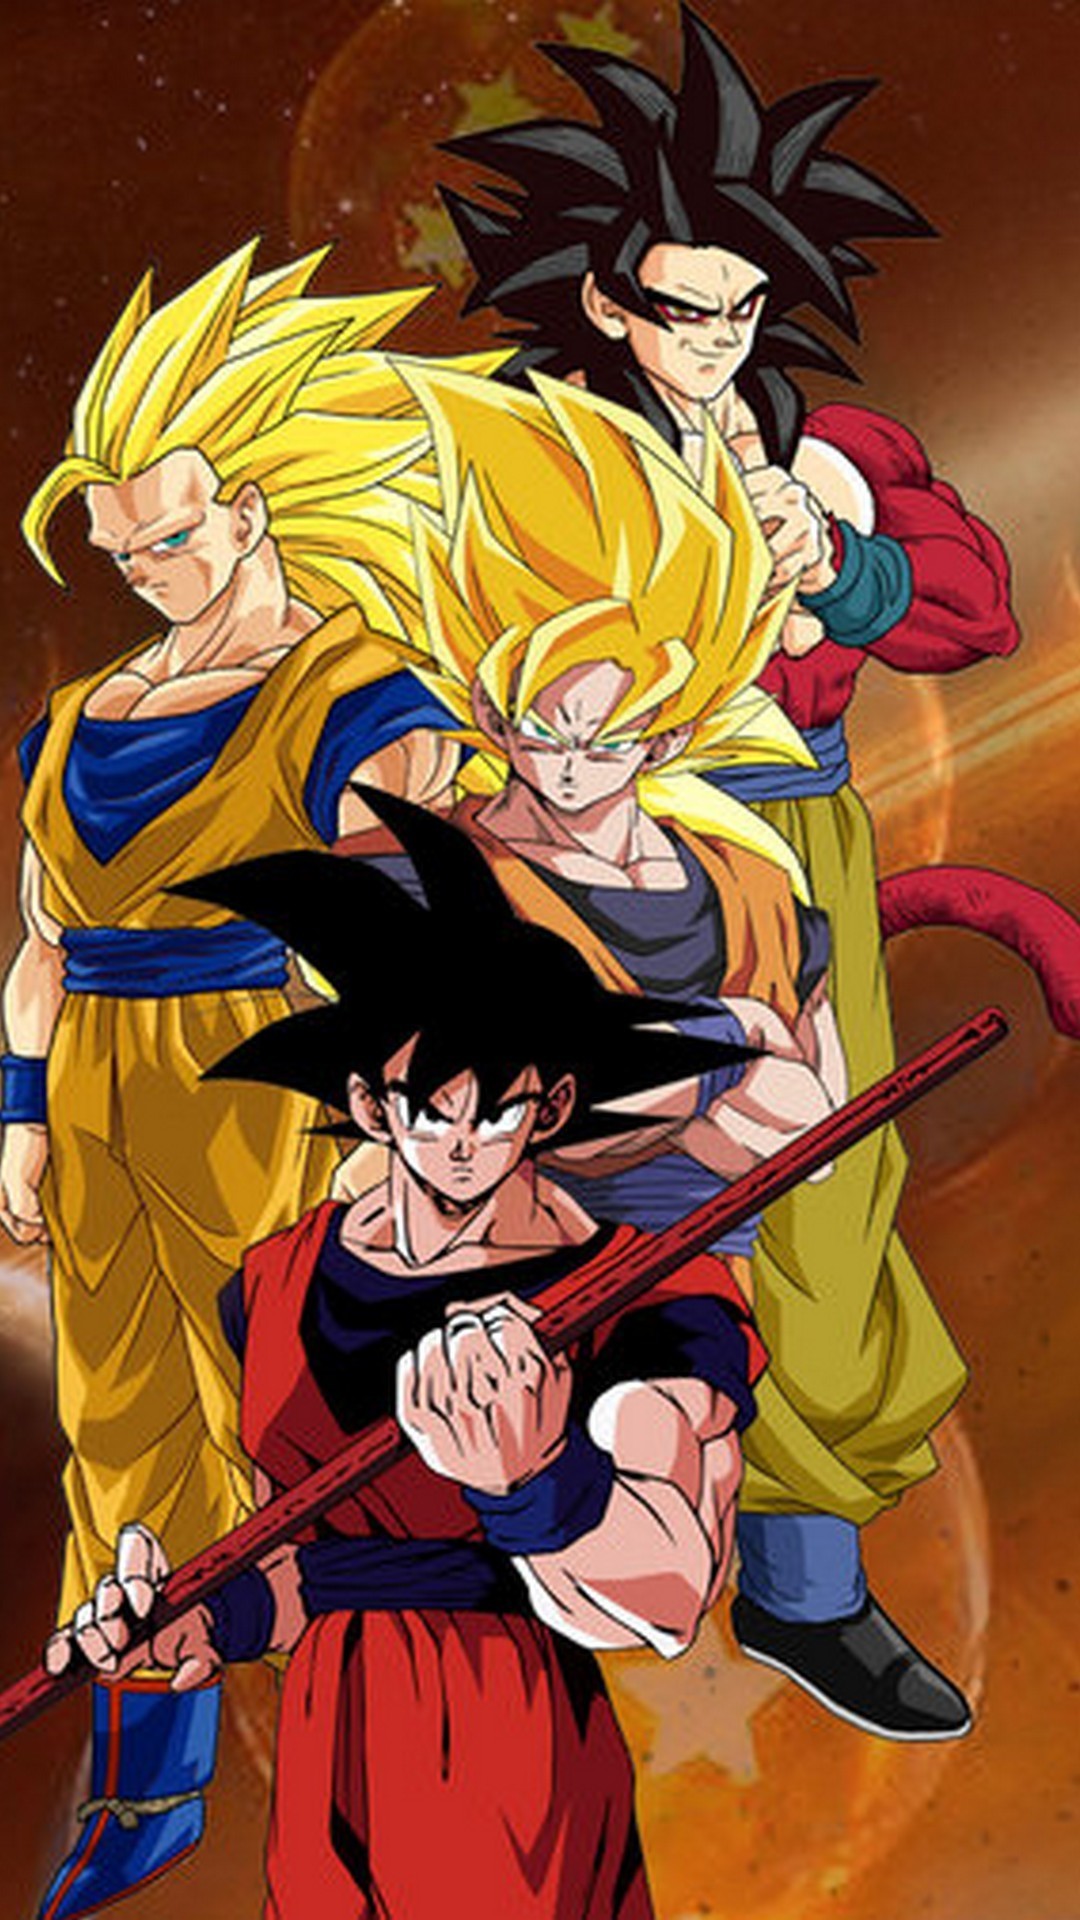 1080x1920 Goku SSJ4 Wallpaper For iPhone with image resolution  pixel. You  can make this wallpaper